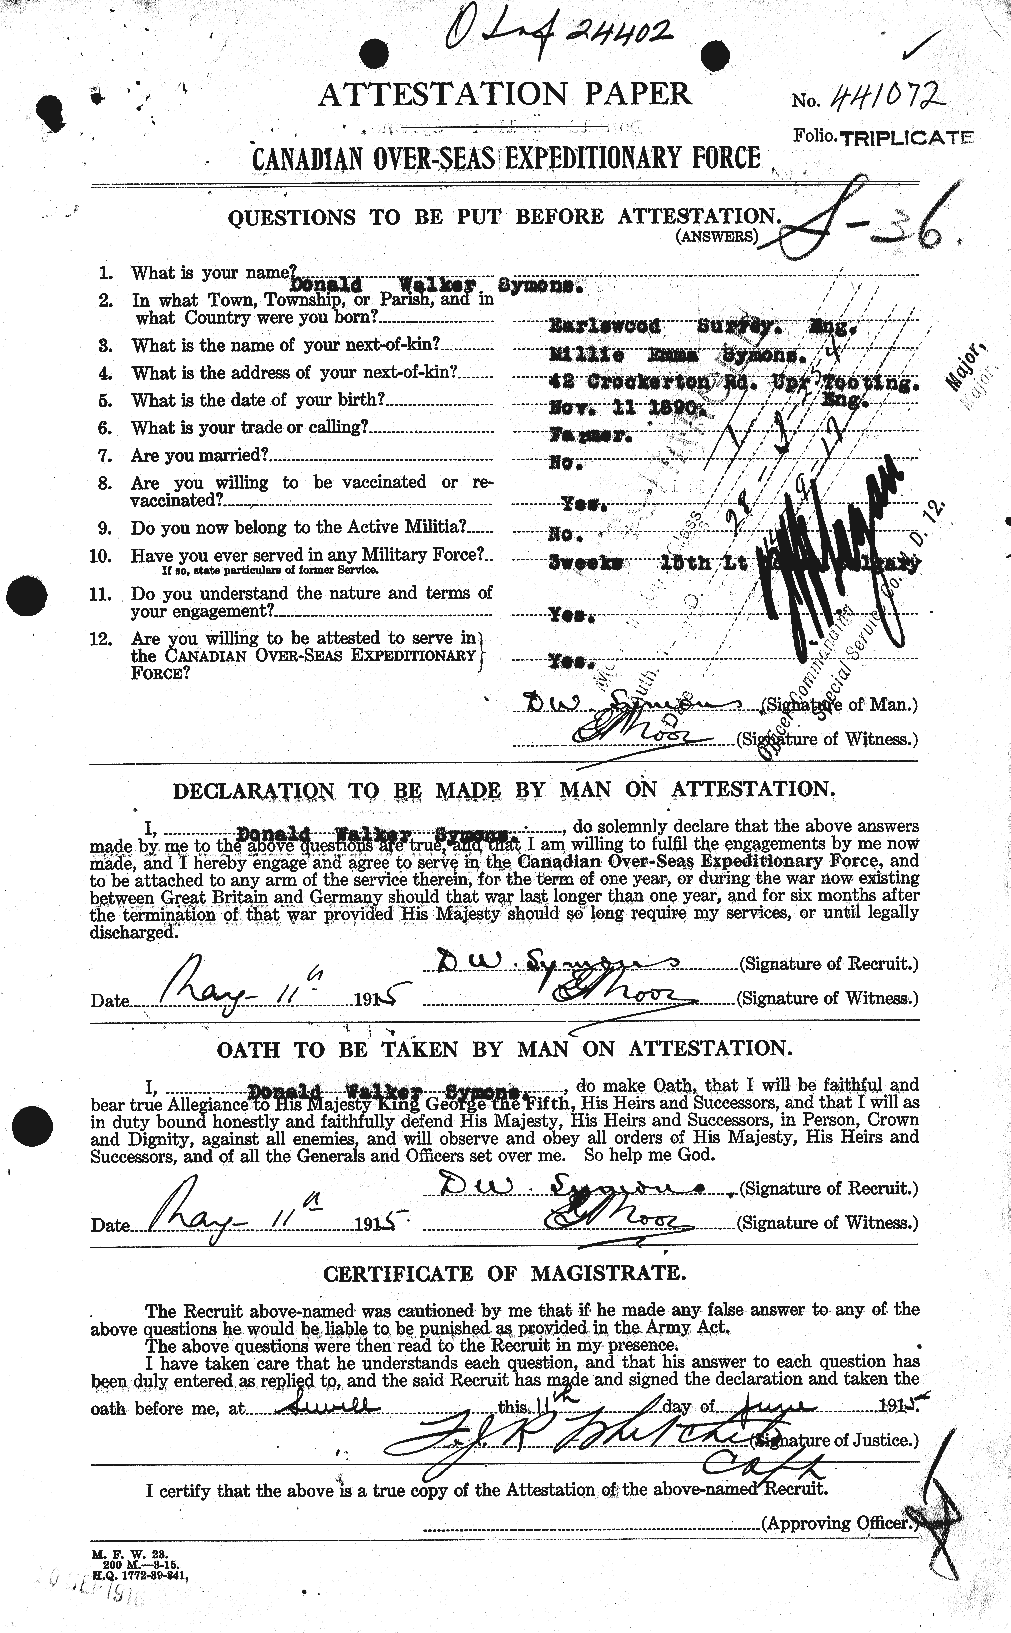 Personnel Records of the First World War - CEF 129174a